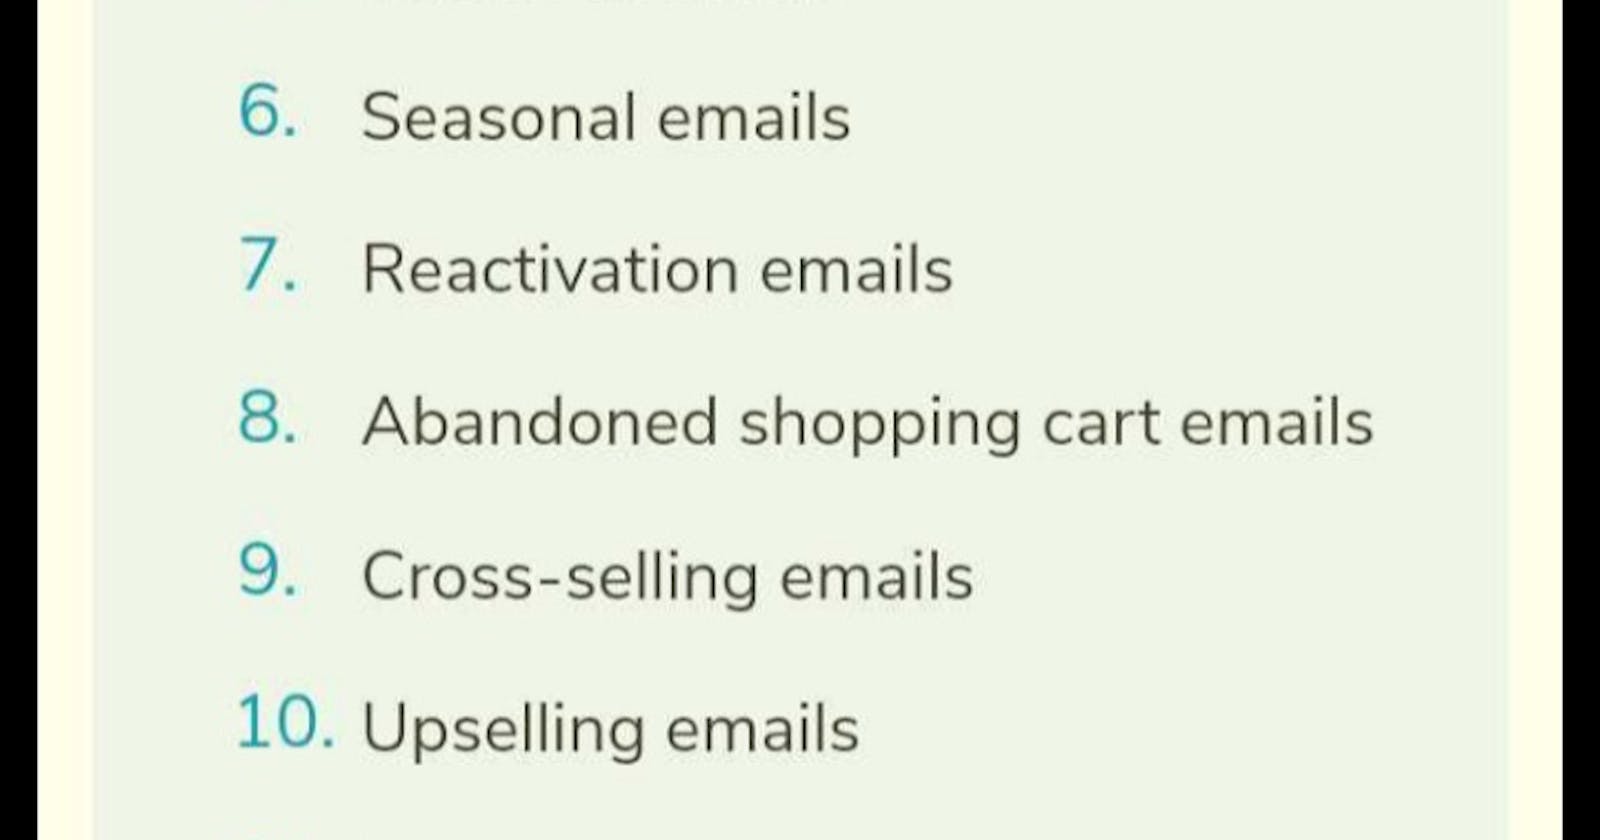 Using Hubspot, set up an email marketing campaign for Customers